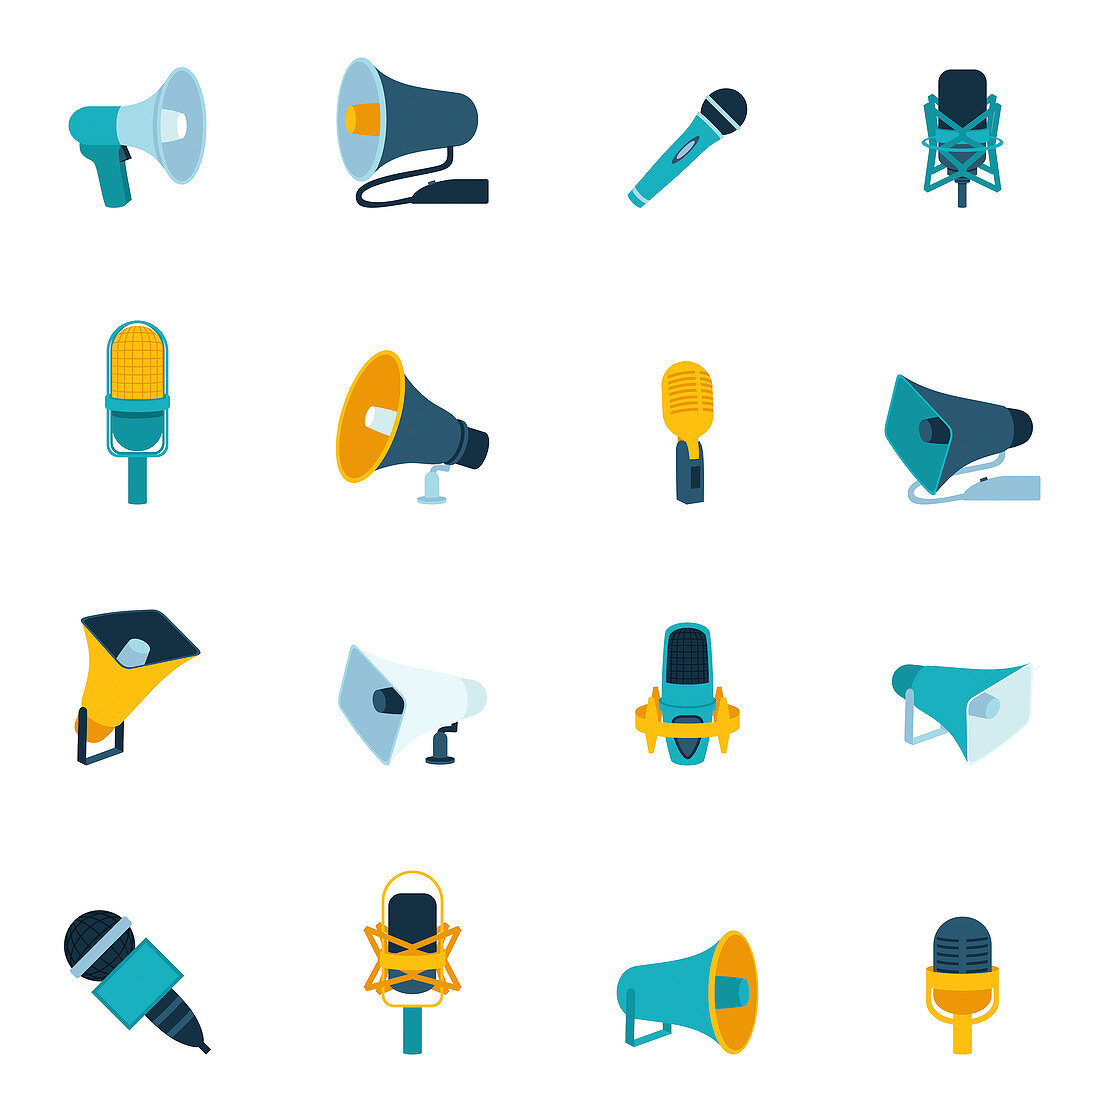 Microphone and megaphone icons, illustration